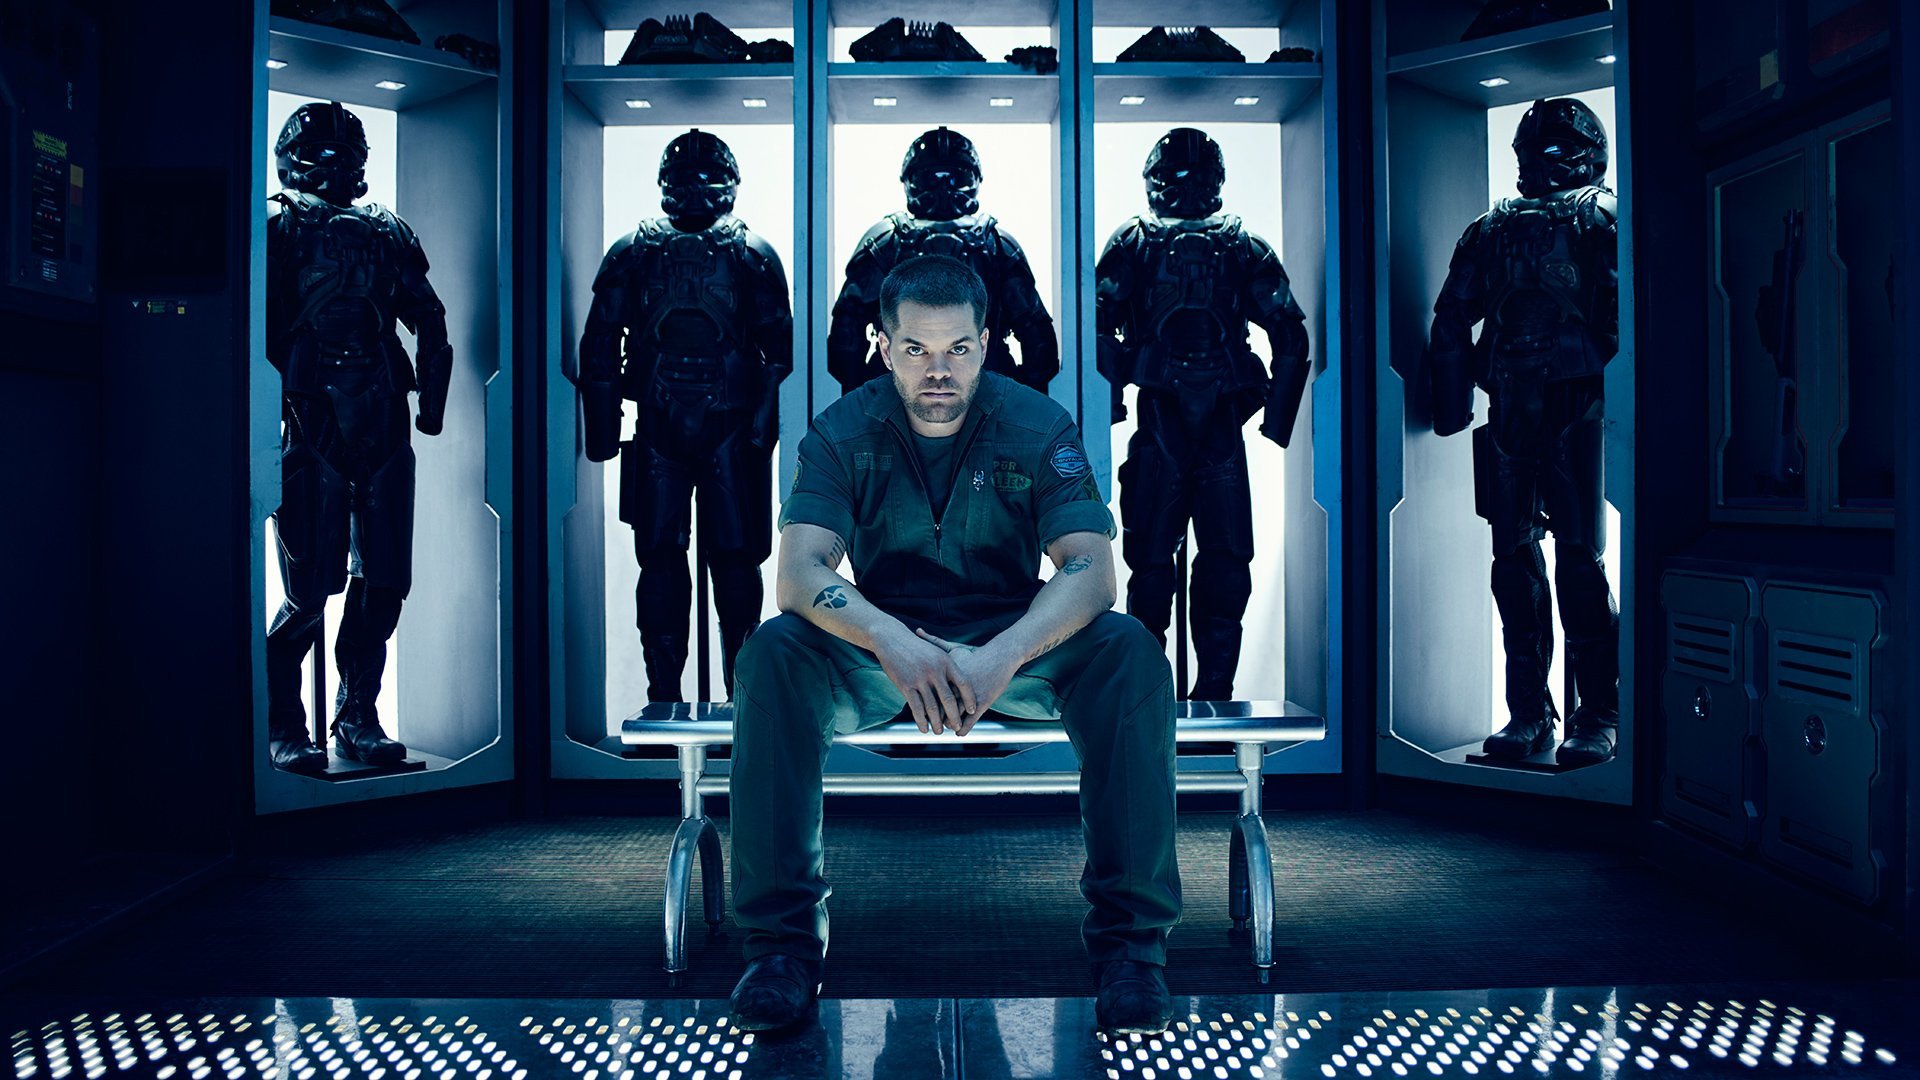 TheExpanse_gallery_101Characters_02